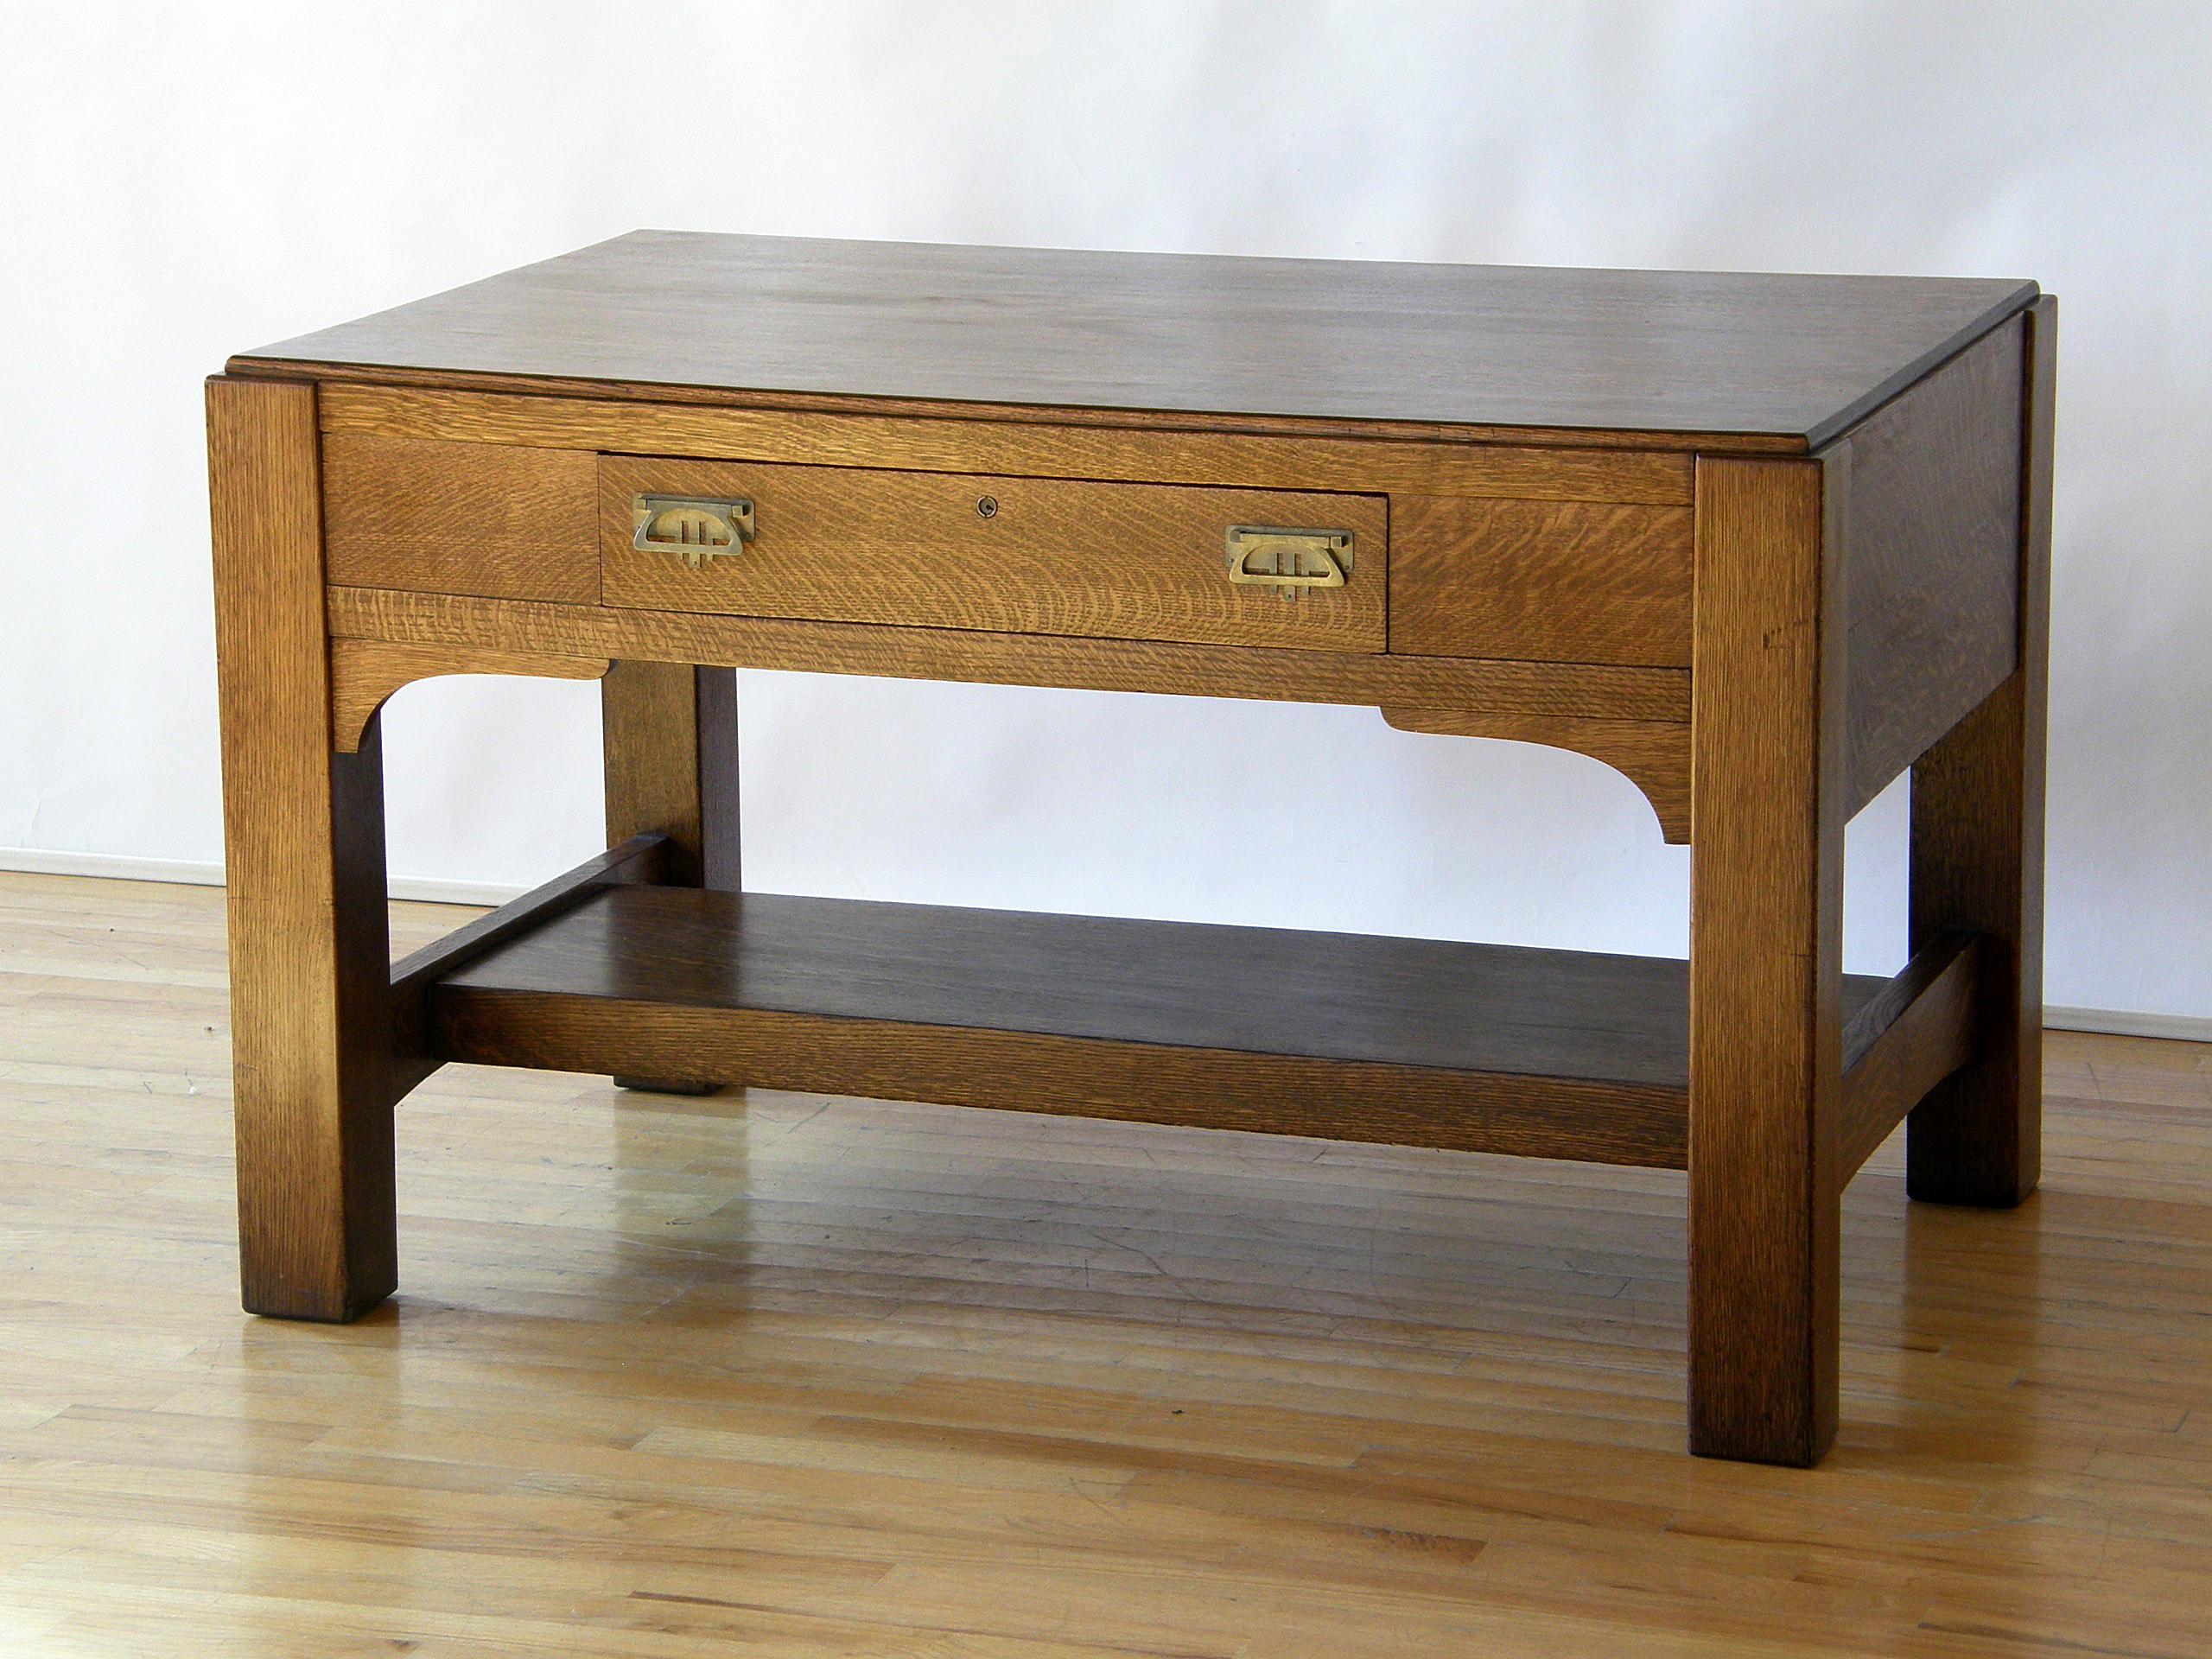 This mission oak library table or desk has a Classic Arts & Crafts style. The drawer has decorative brass pulls and escutcheons with a refined and restrained geometric design. The chunky legs are braced front to back, and those cross pieces support